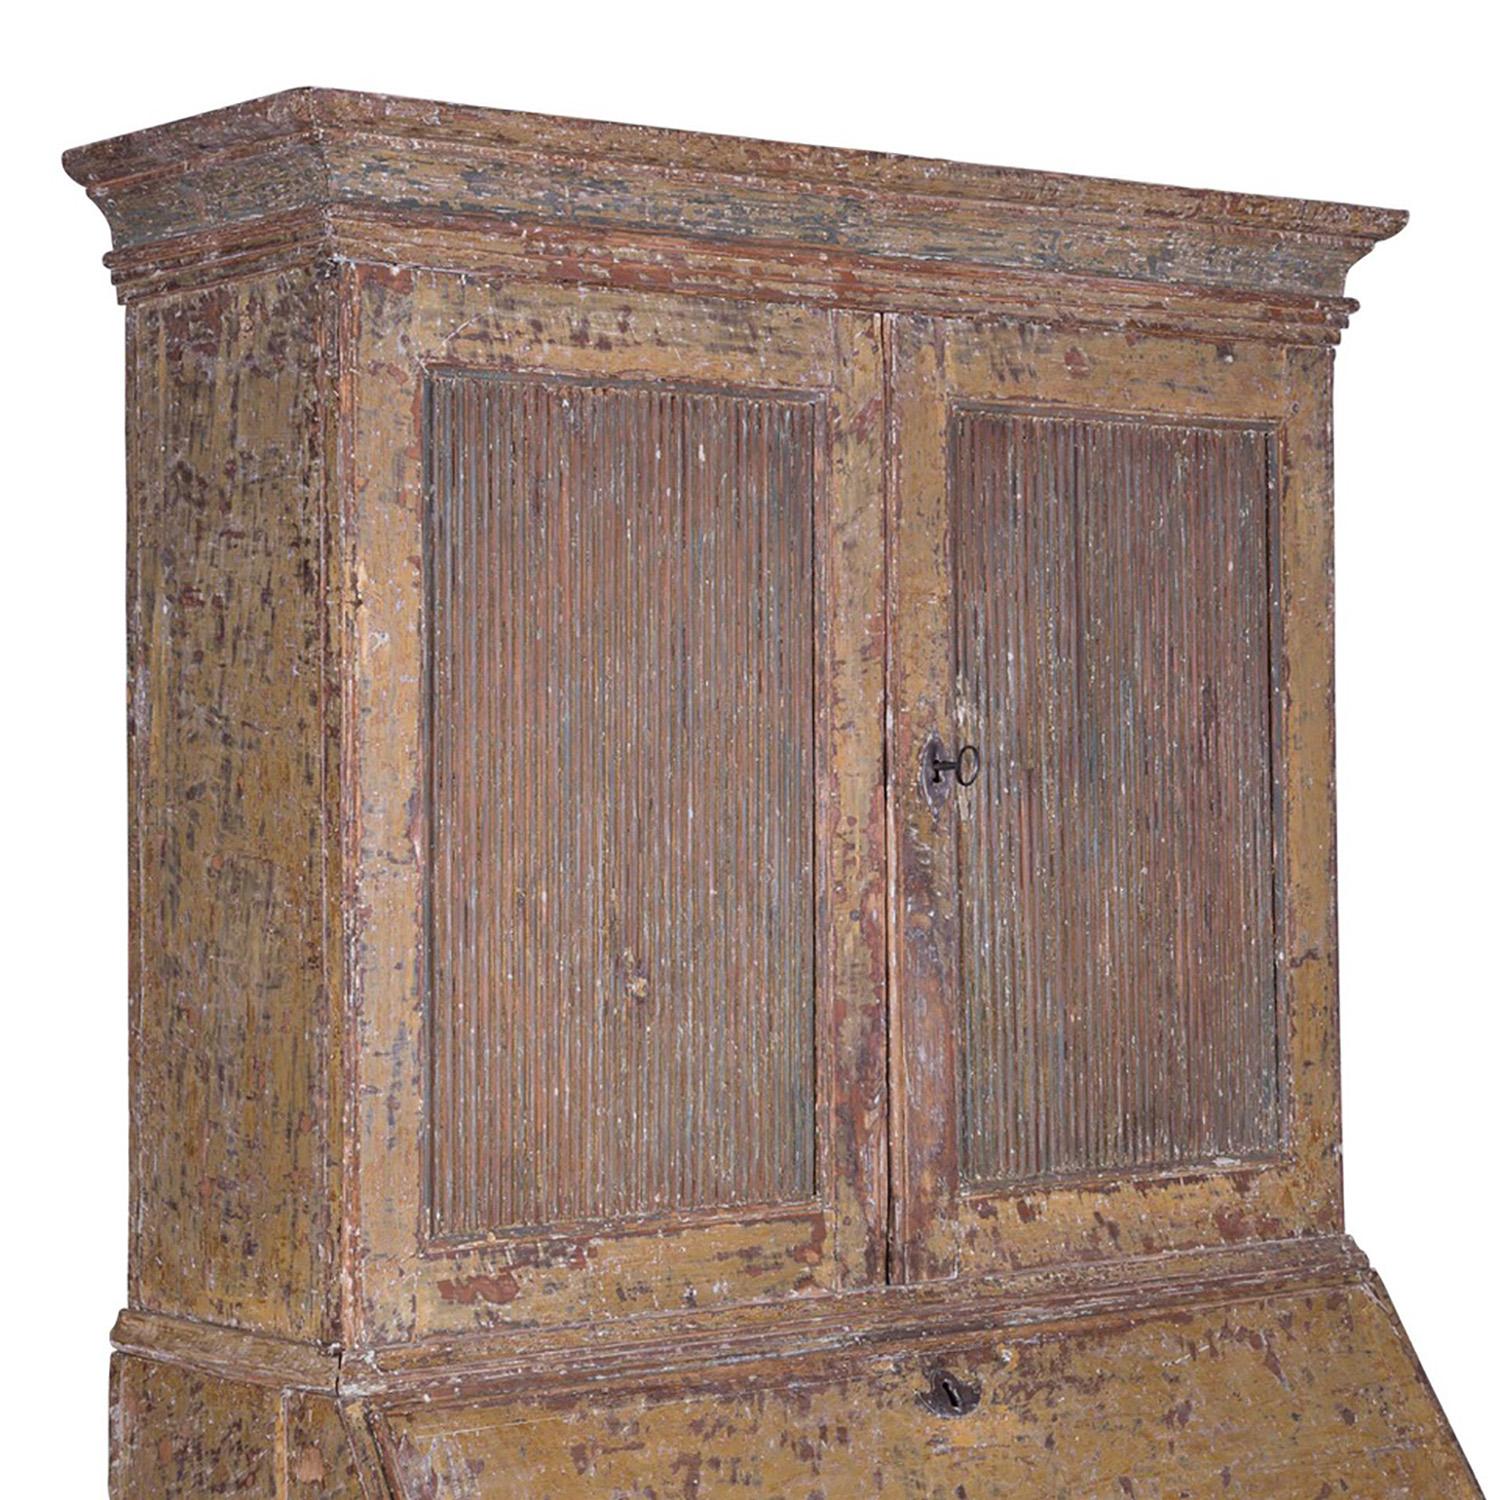 This late 18th century Gustavian secretaire was made in Berslagen in 1790 and has been scraped to secondary paint. The top two reeded front doors open to two shelves for storage, a fall front desk opens to eight drawers, and there are a further two